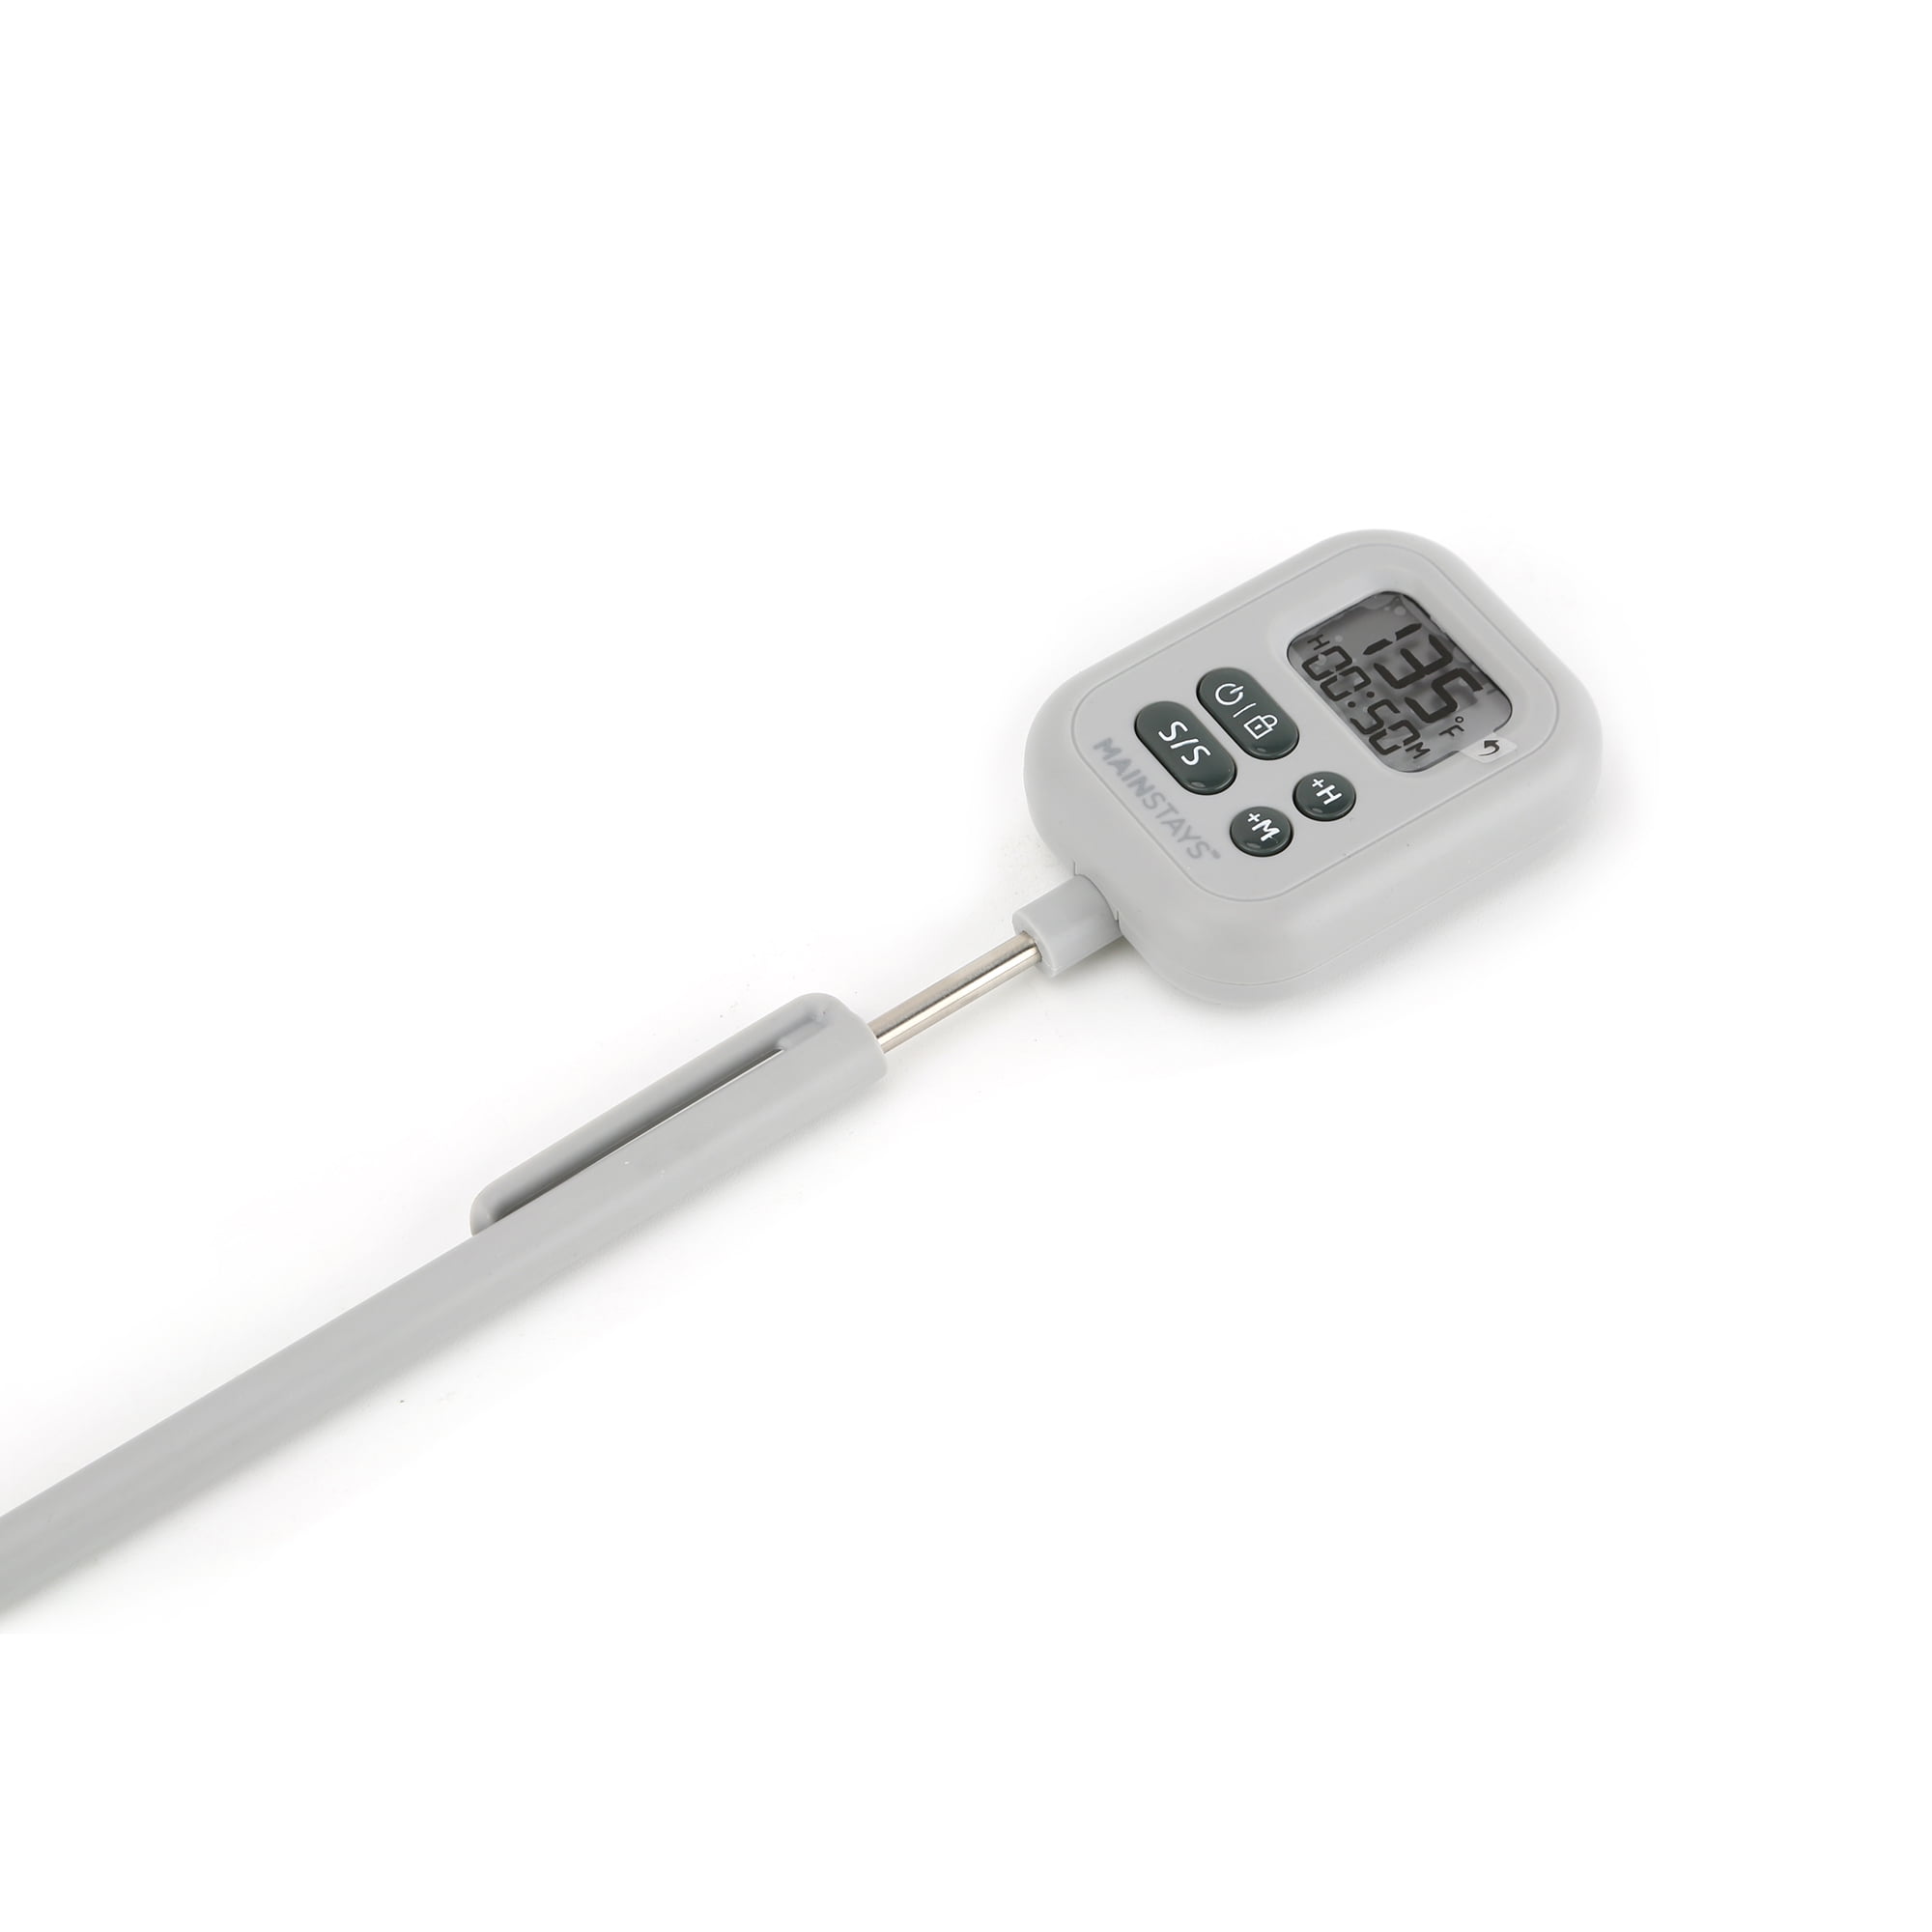 Mainstays NSF Certified Oven Safe Meat Thermometer, Extra Large Dial,  Silver